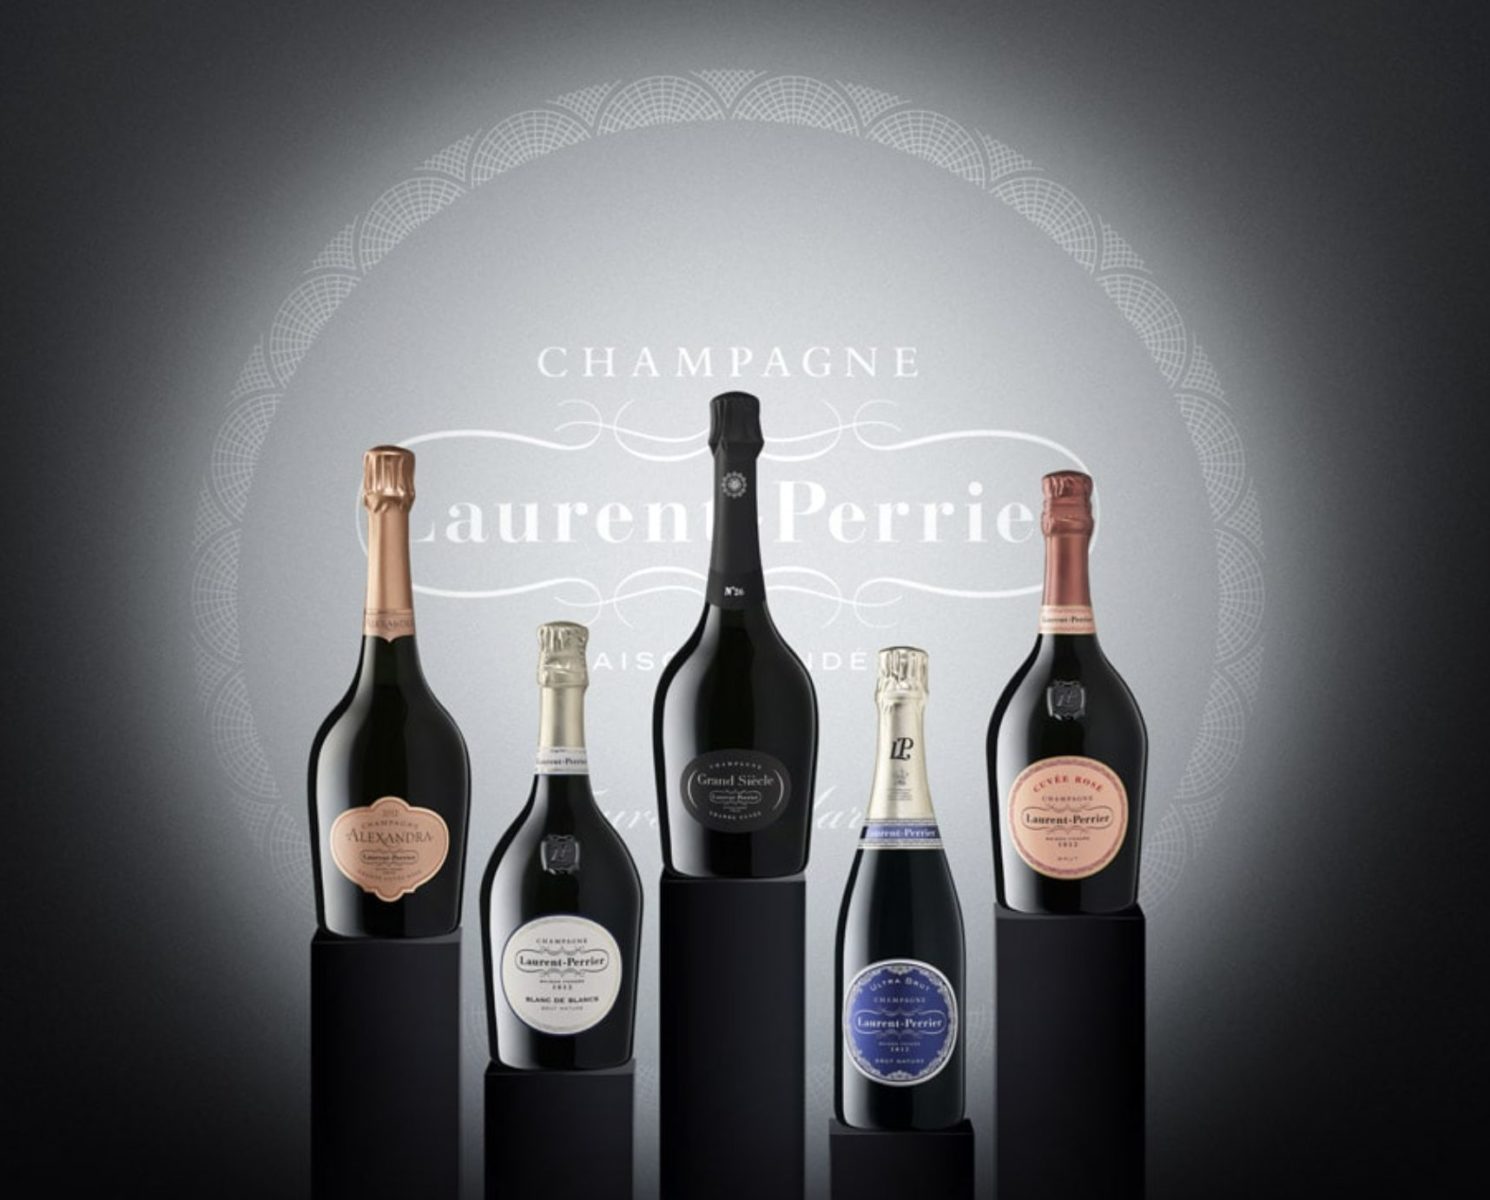 LUXURIA LIFESTYLE INTERNATIONAL WELCOMES LAURENT PERRIER CHAMPAGNE AND THE BOTTLE CLUB